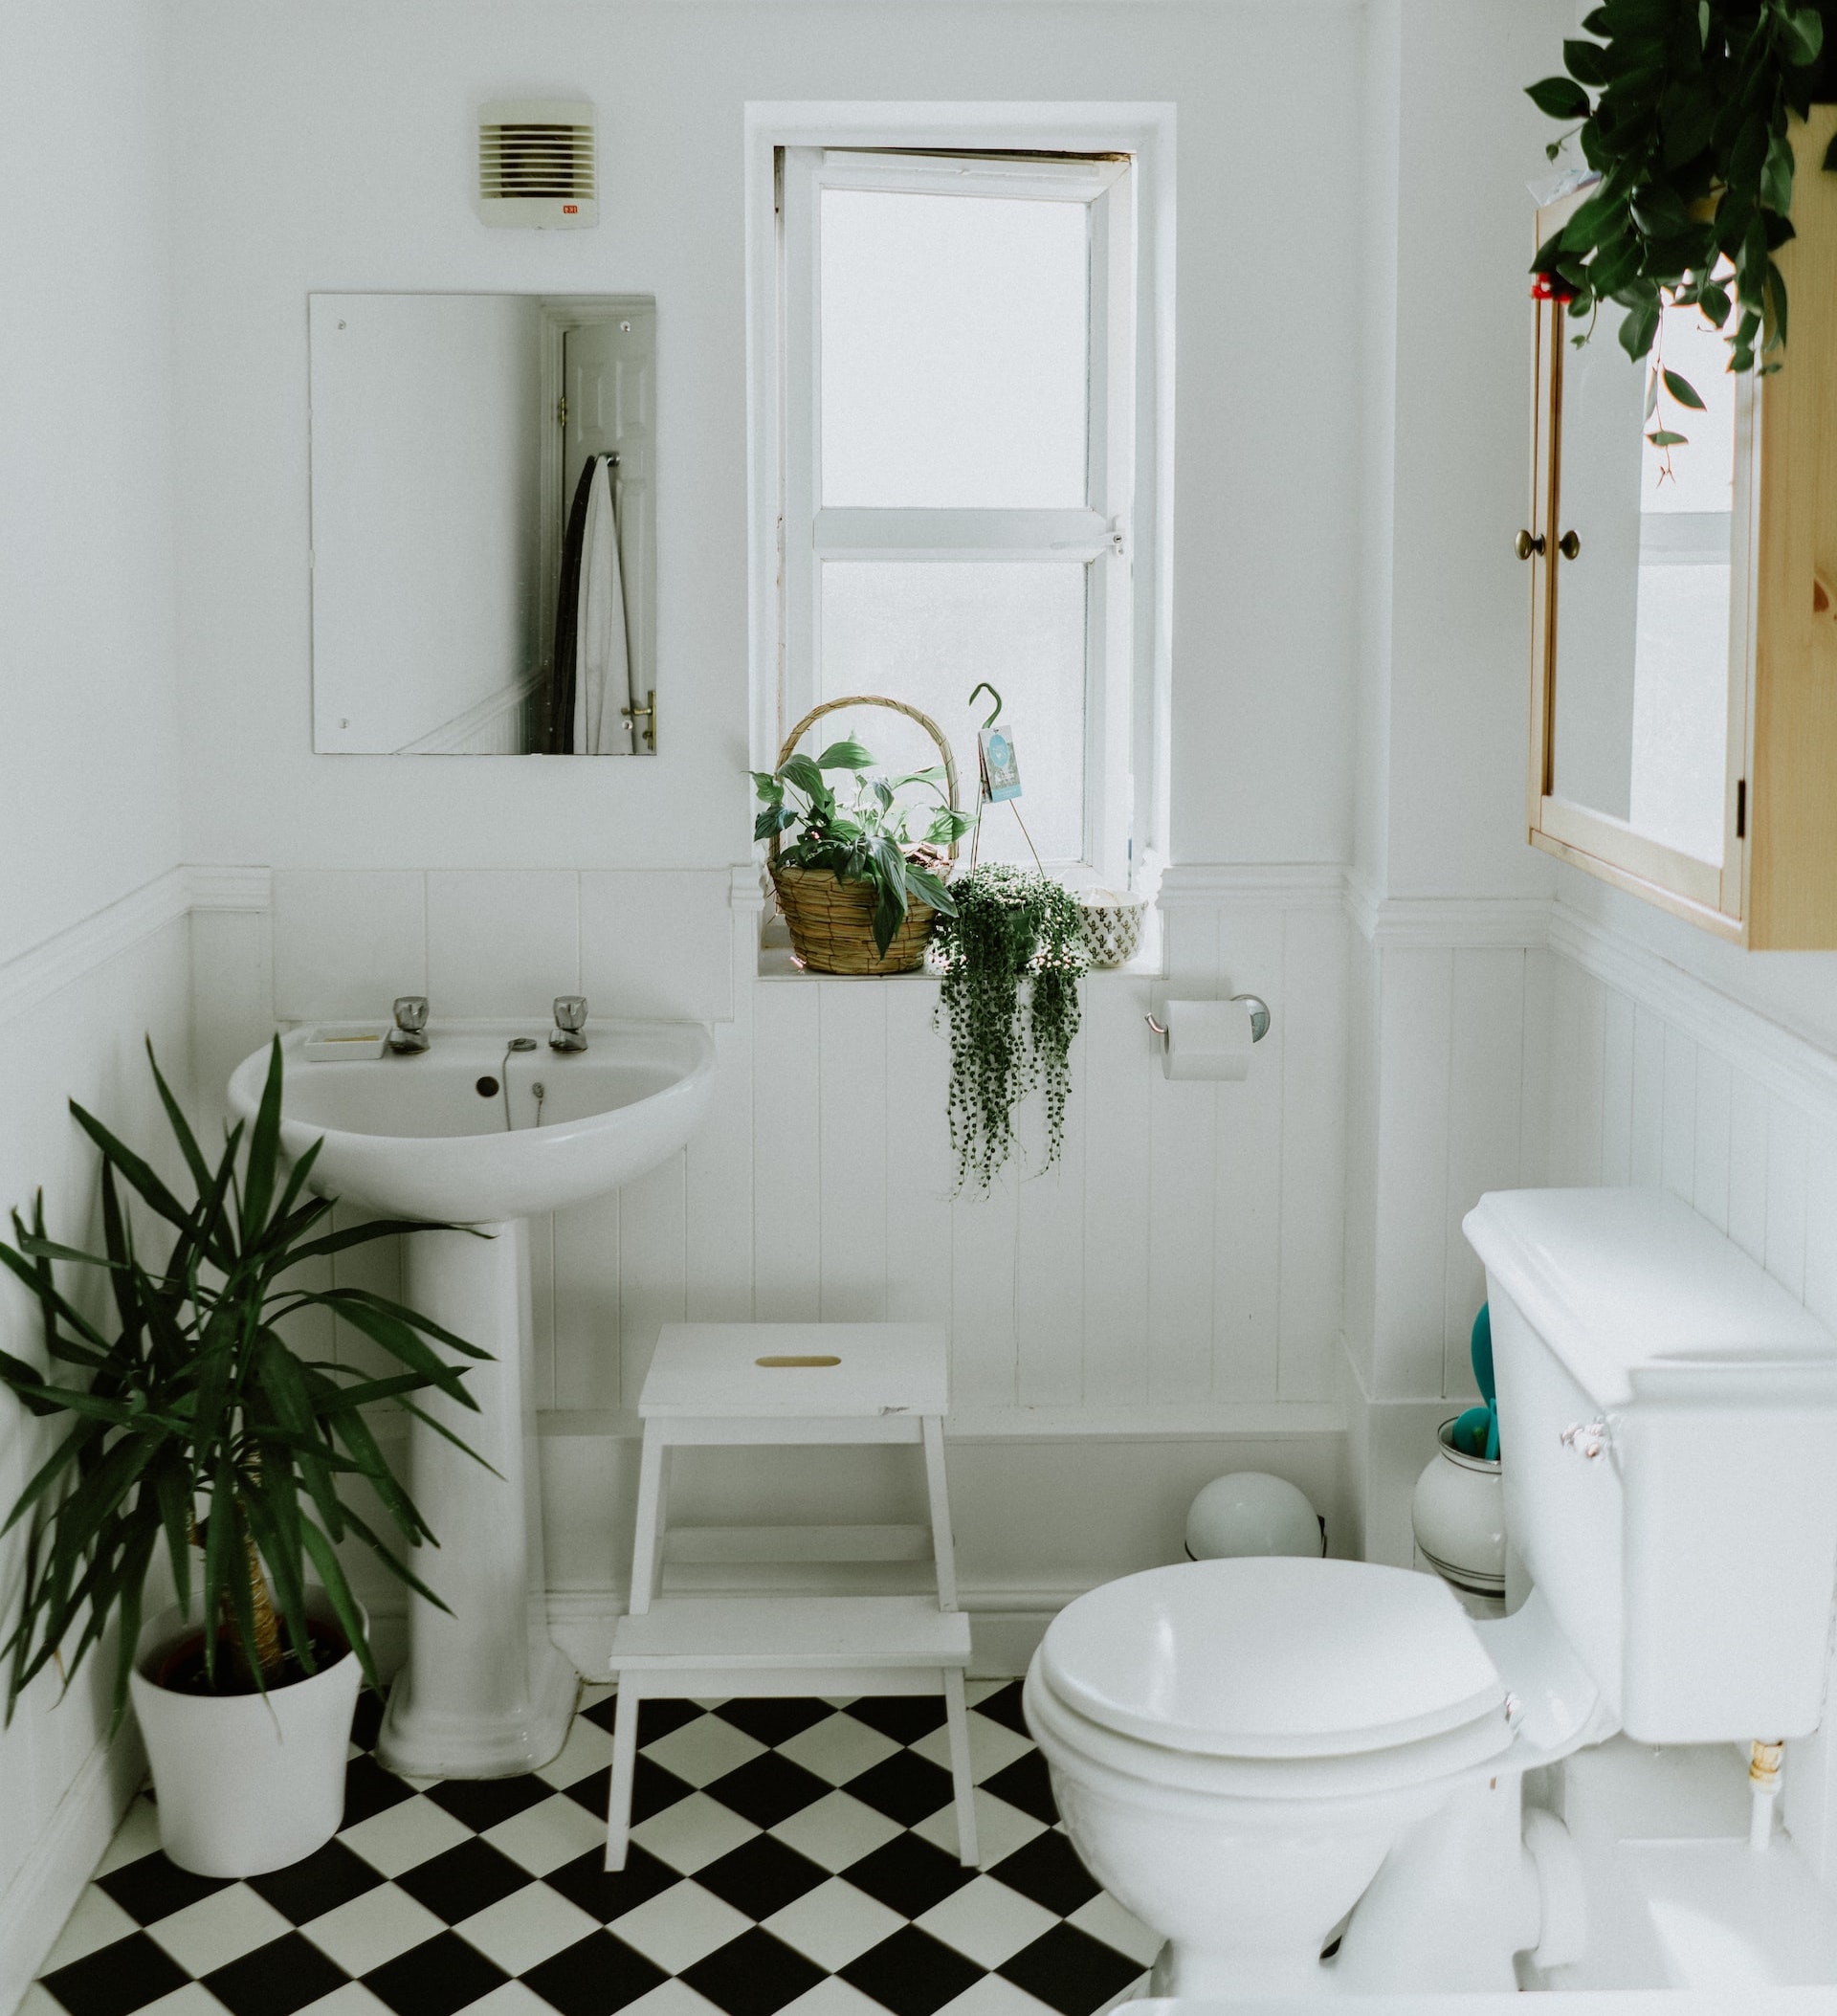 Small Bathroom With Checkered Tiles